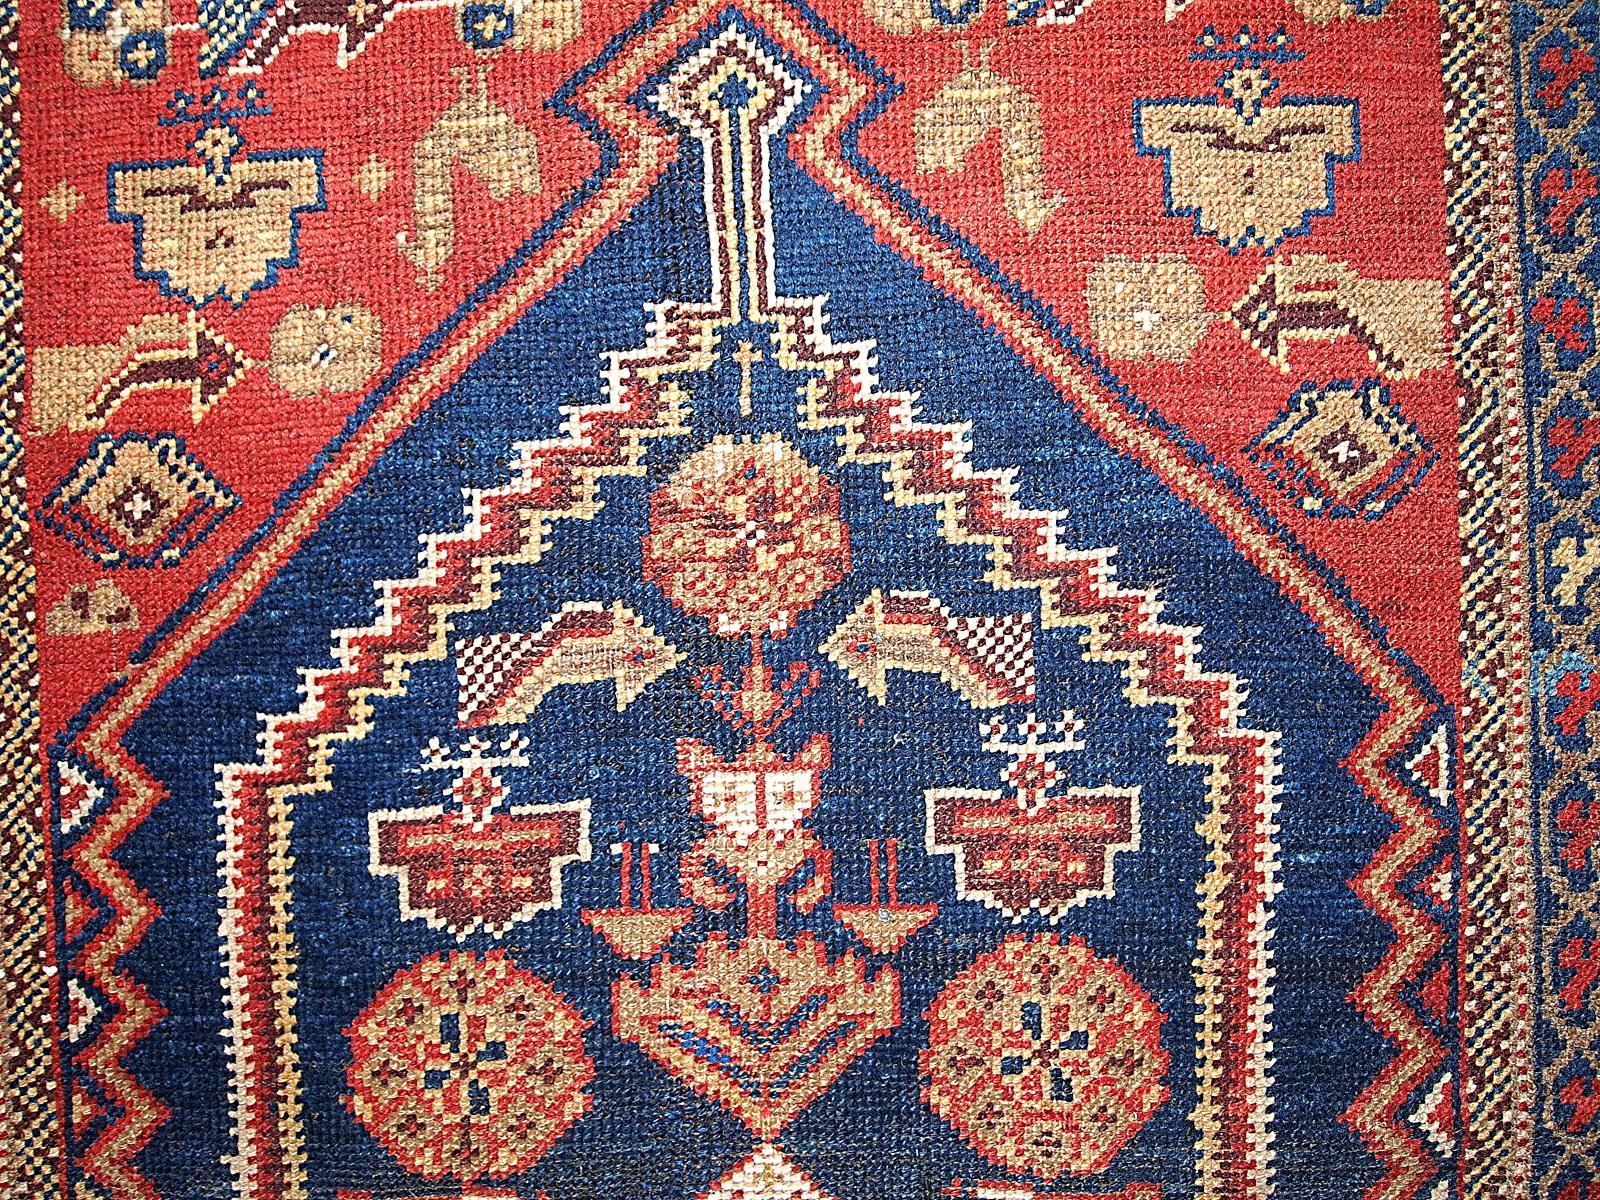 1920s style rug